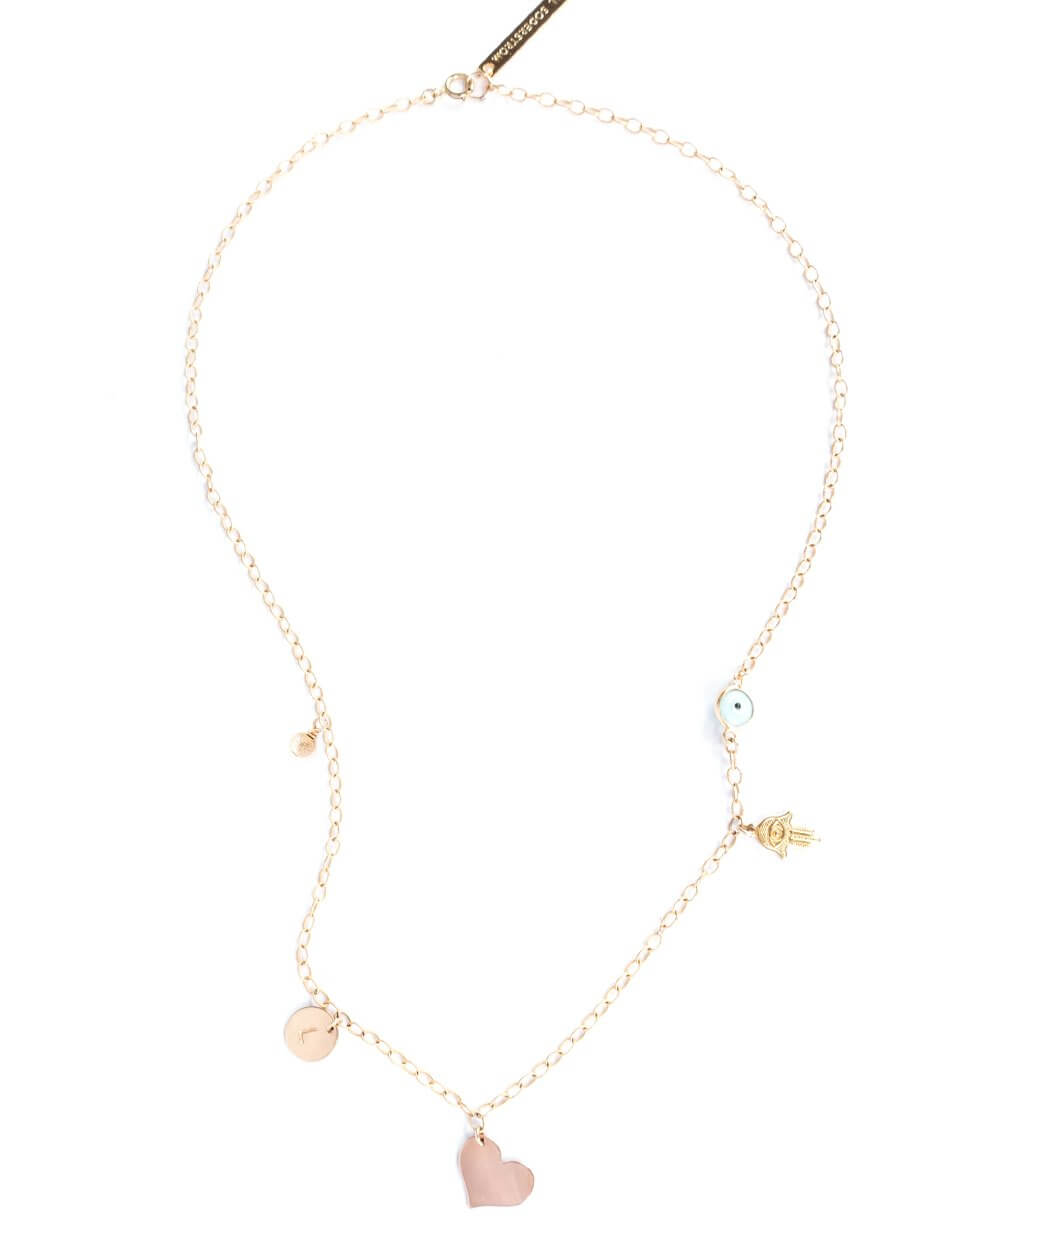 April Soderstrom To Mom With Love Necklace, $130